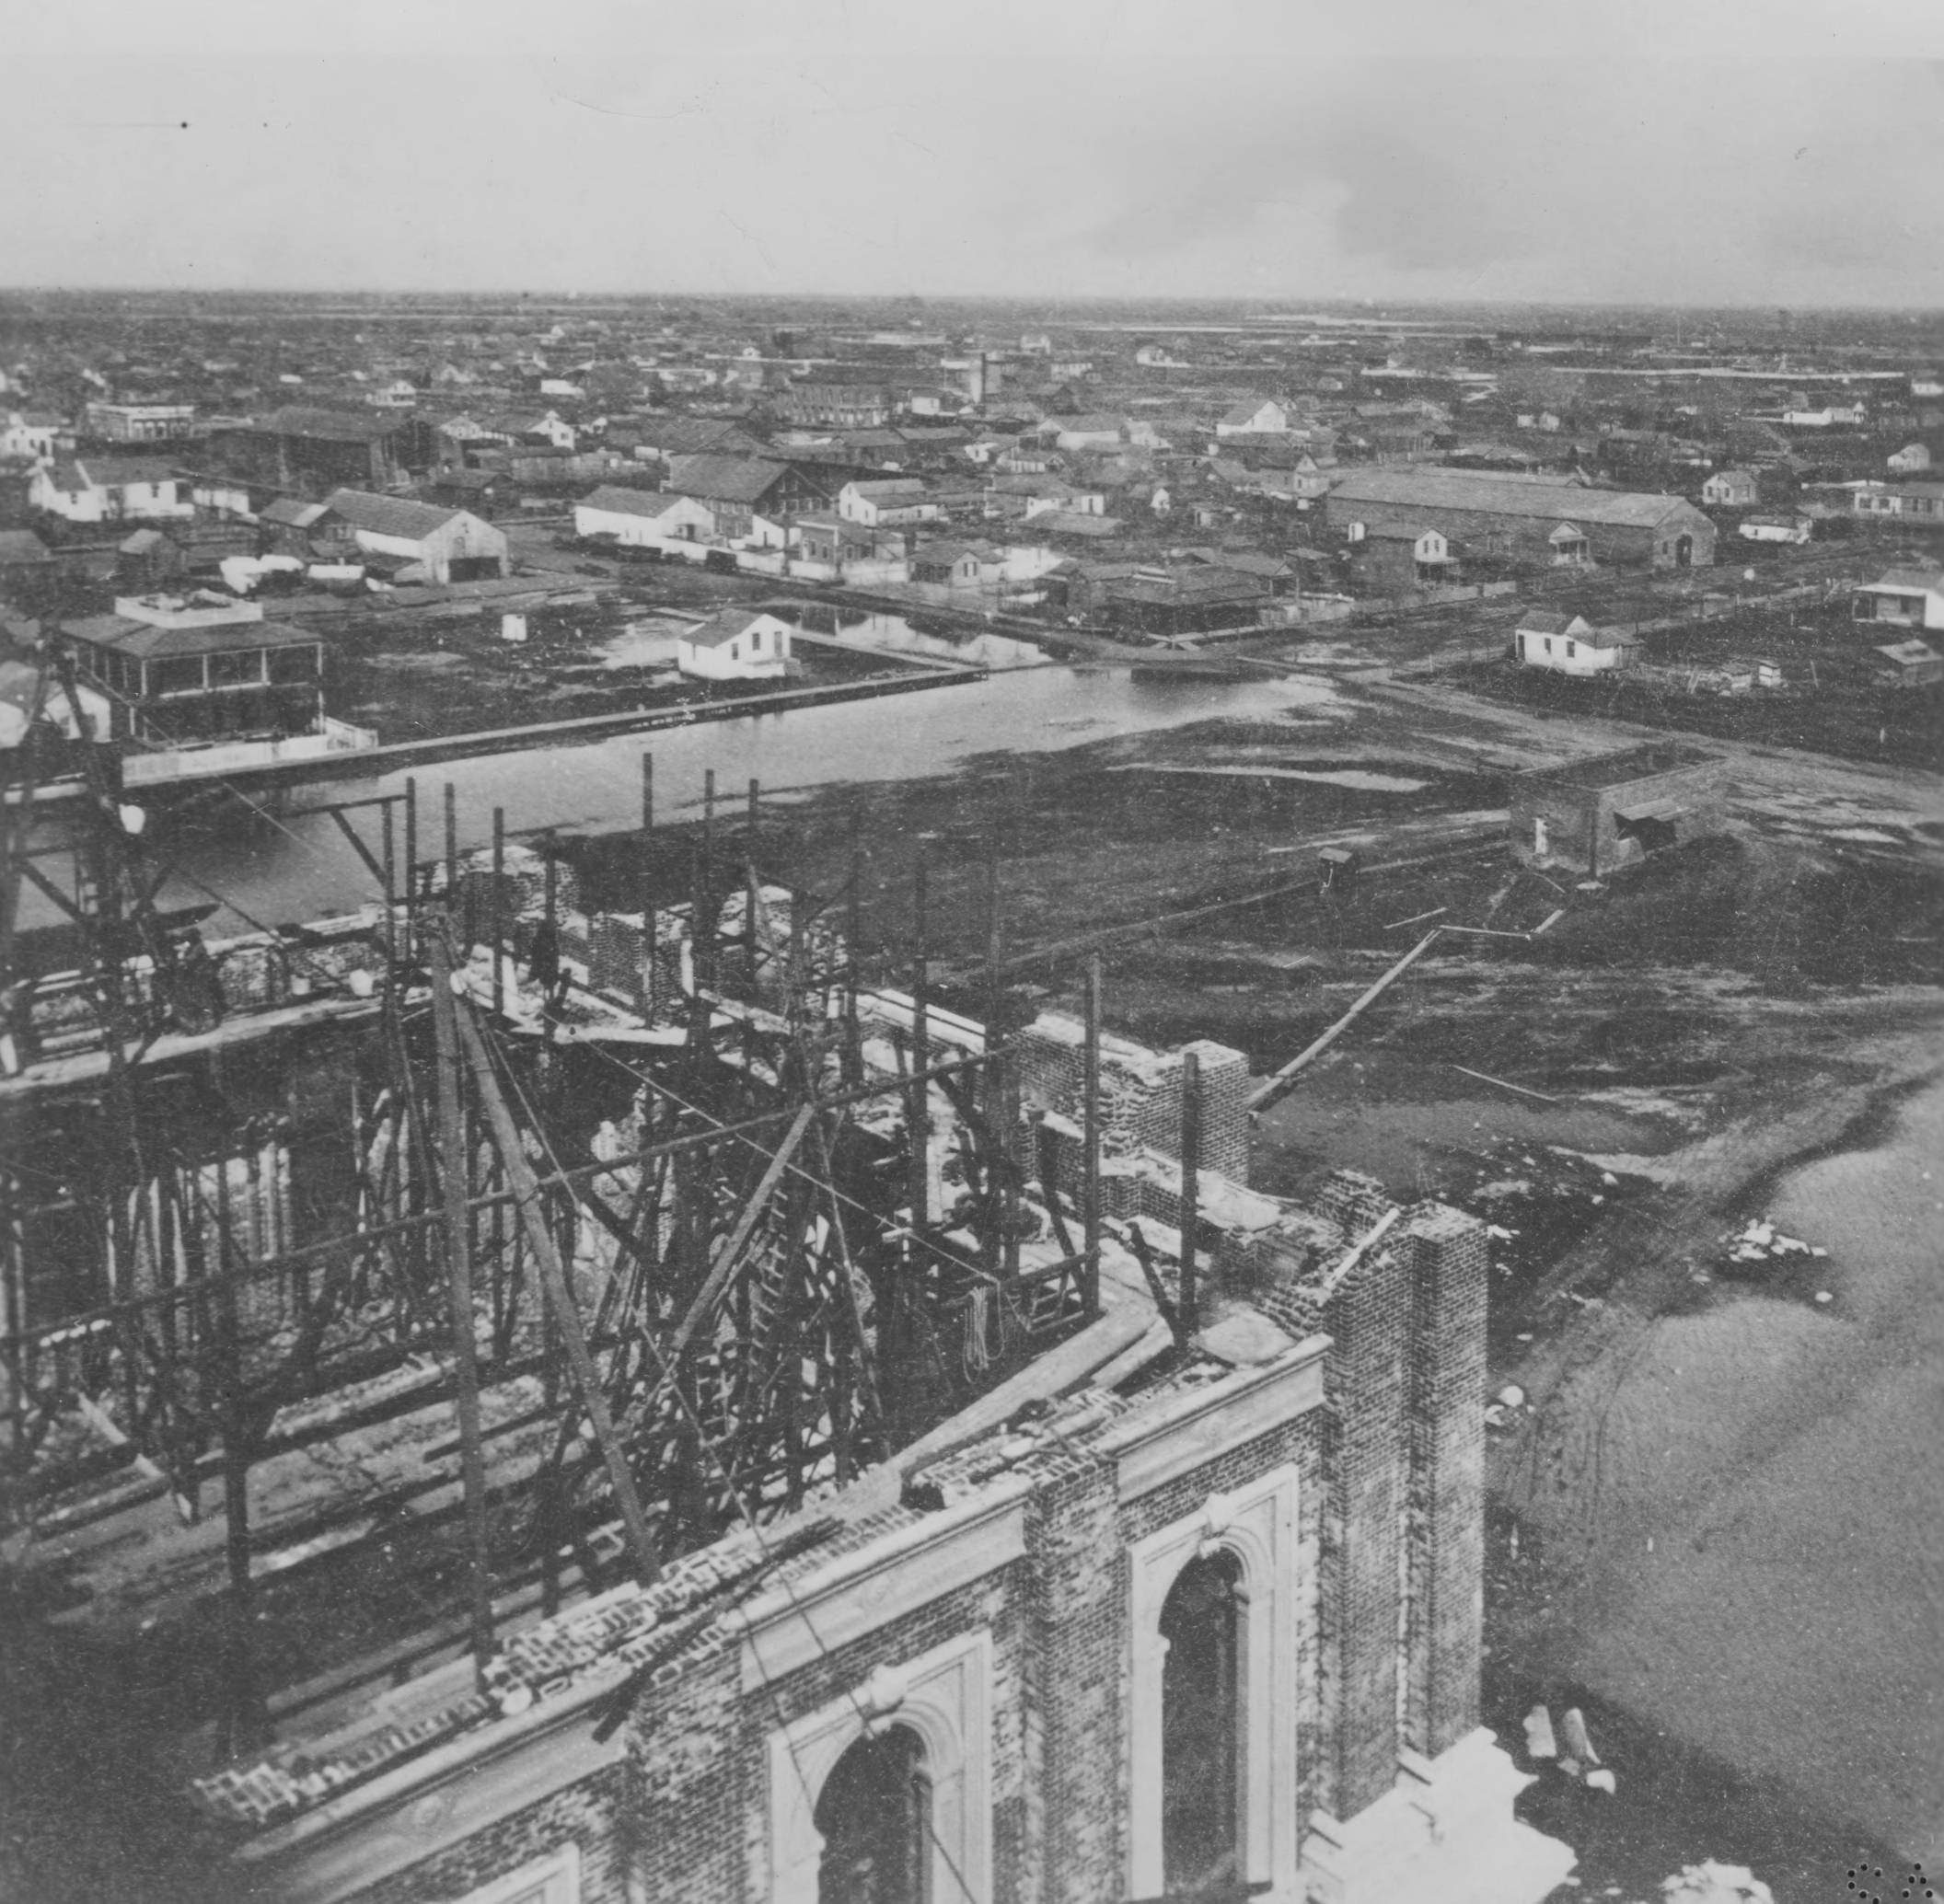 A rainy day in 1868 is viewed from on high upon the unfinished dome of the California State Capitol building. N Street and 12th Street intersect in the upper portion of the photograph.